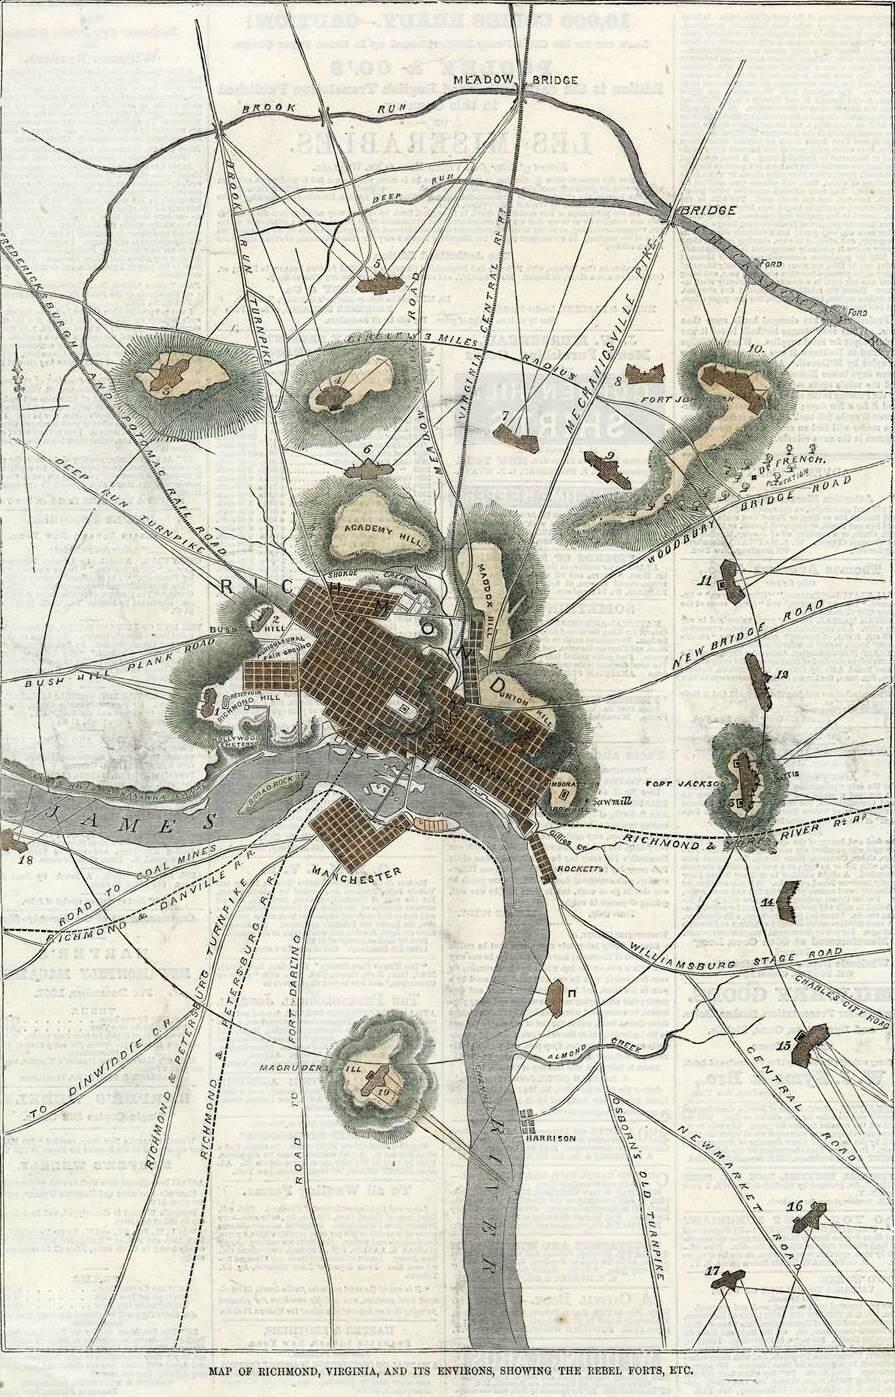 Map of Richmond, Virginia, and its environs, showing the rebel forts, etc.